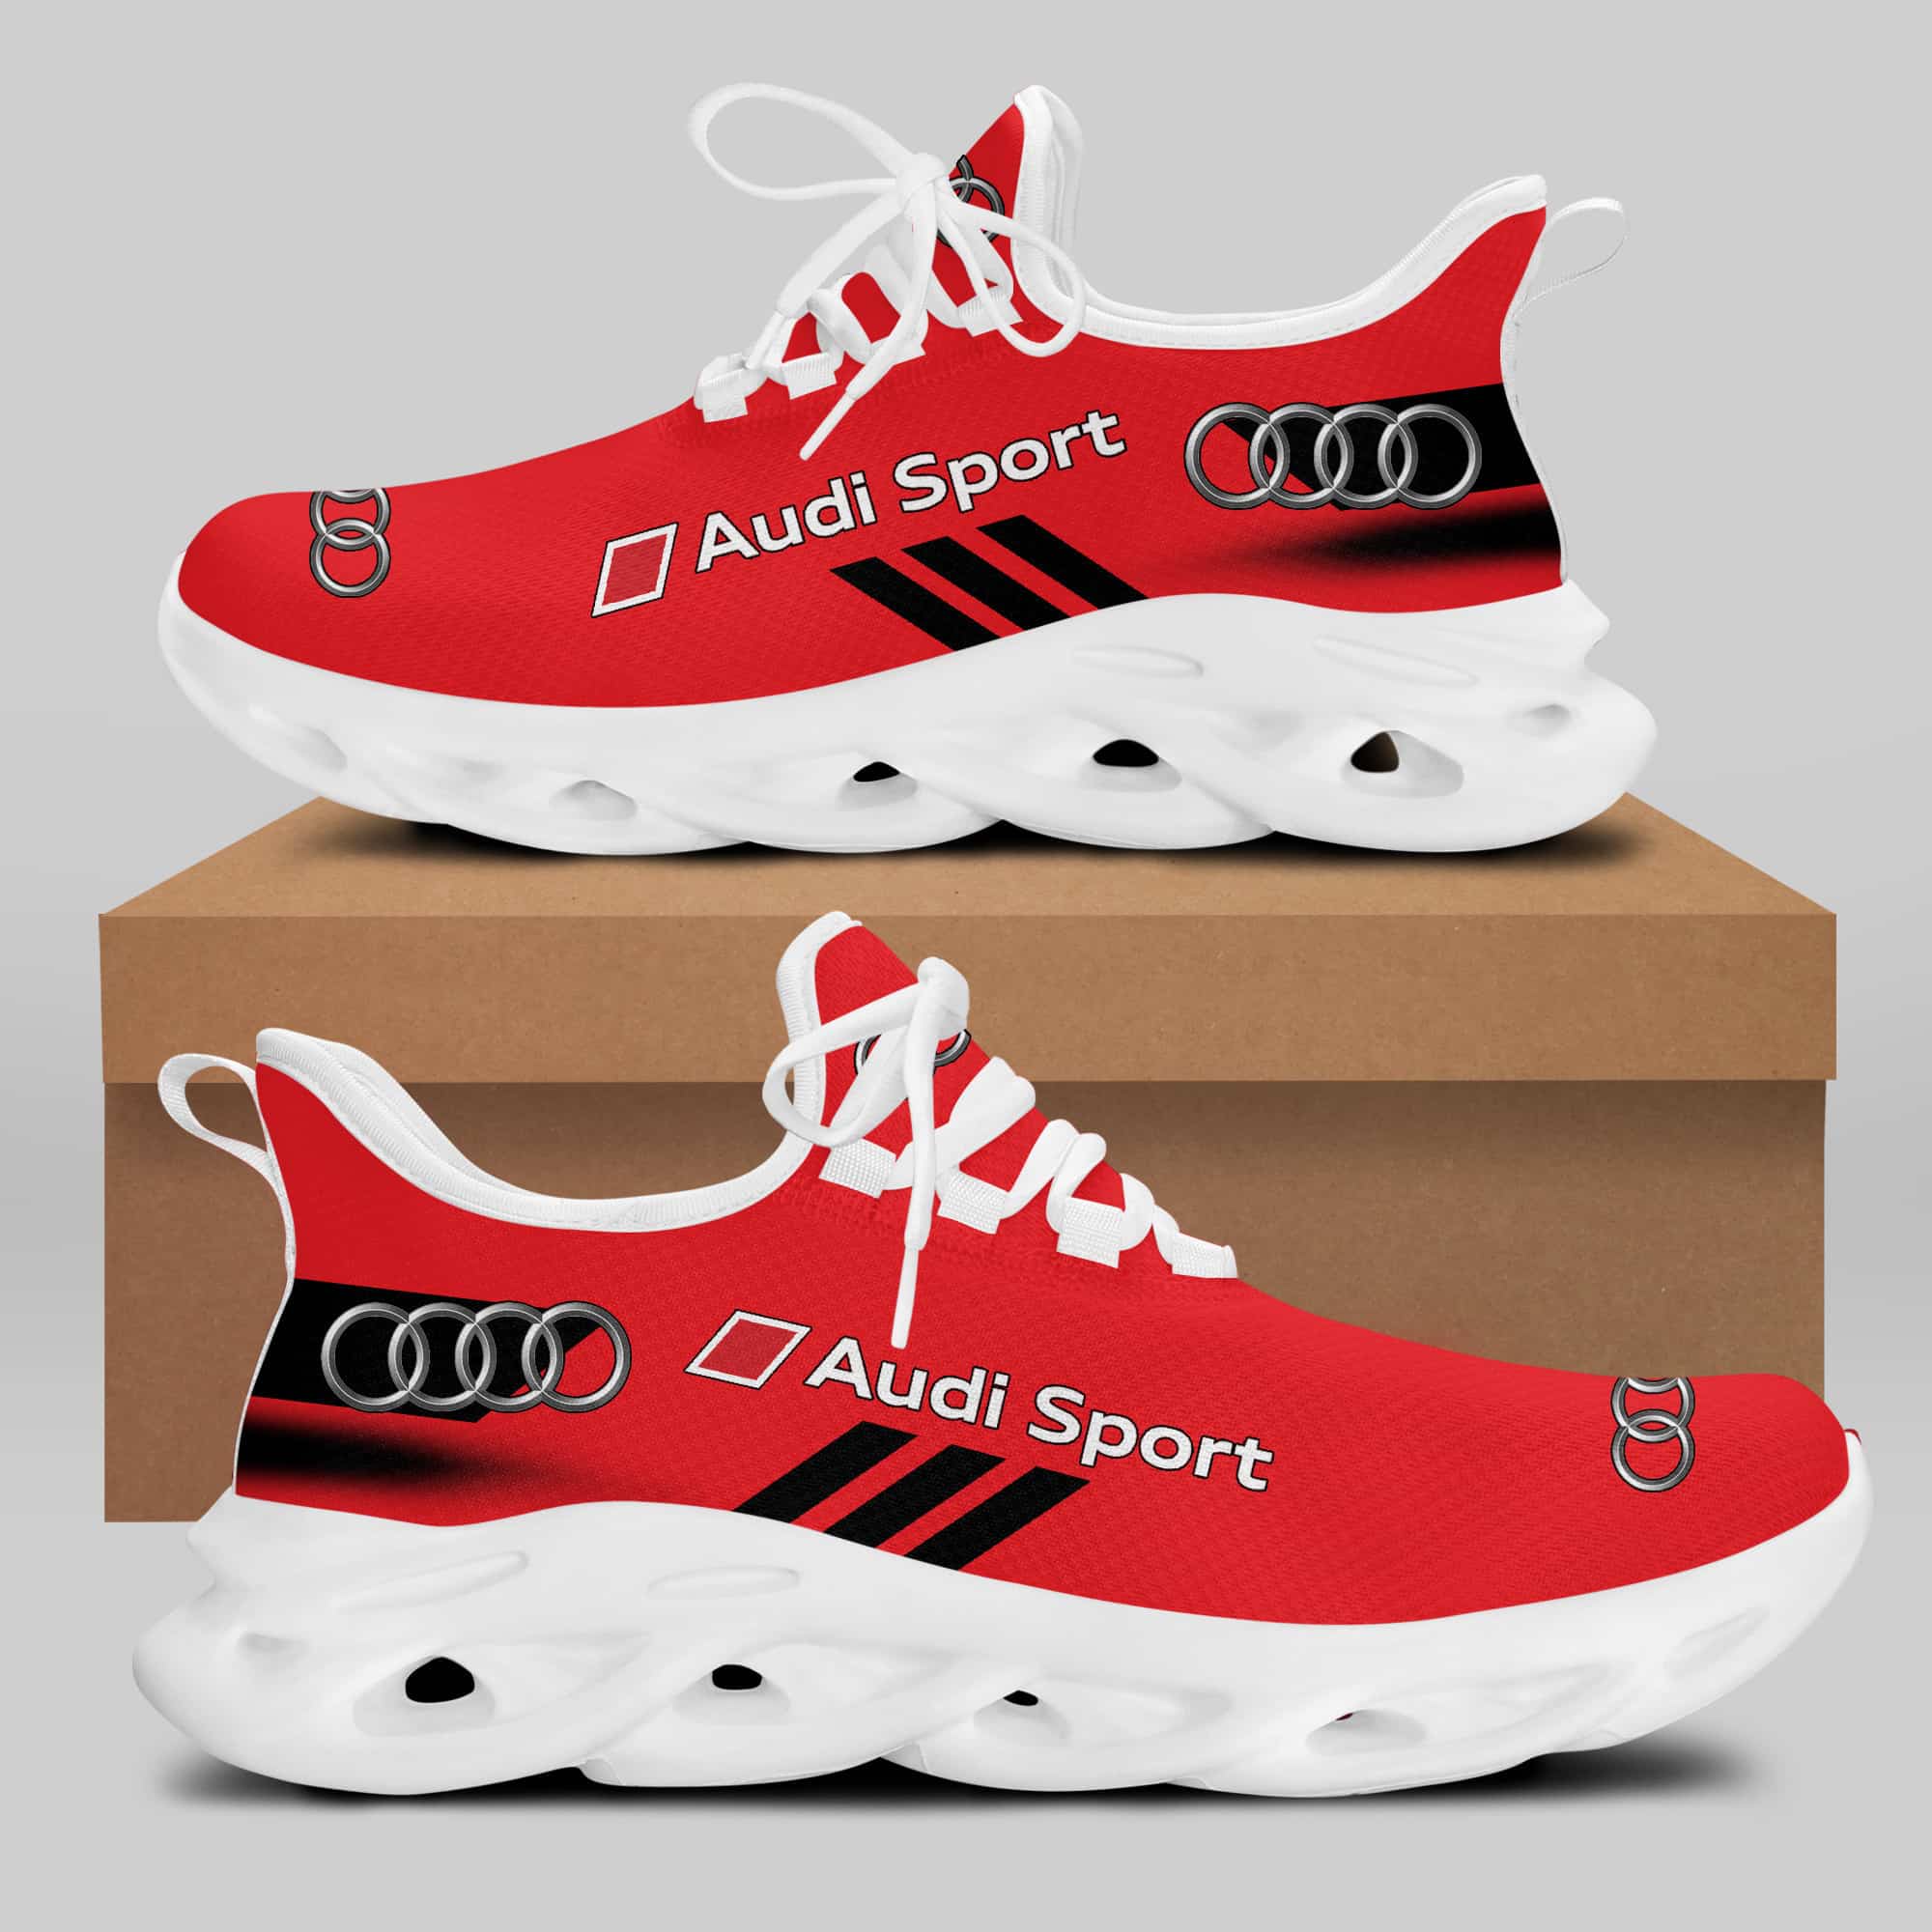 Audi Sport Running Shoes Max Soul Shoes Sneakers Ver 9 2